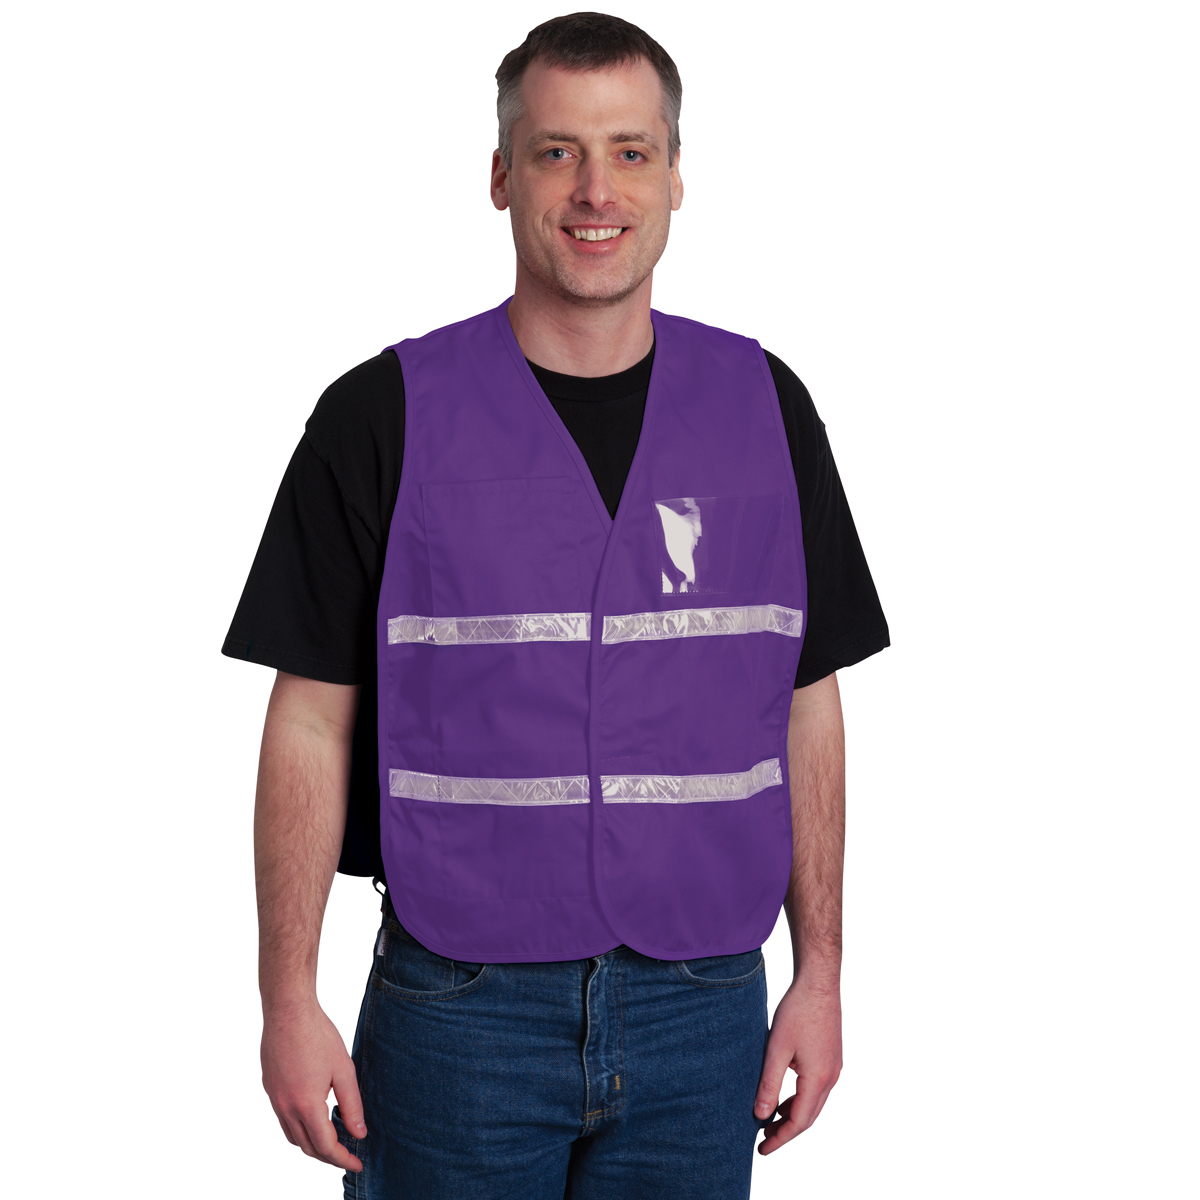 PIP® One Size Fits Most Purple Cotton Polyester Command Vest